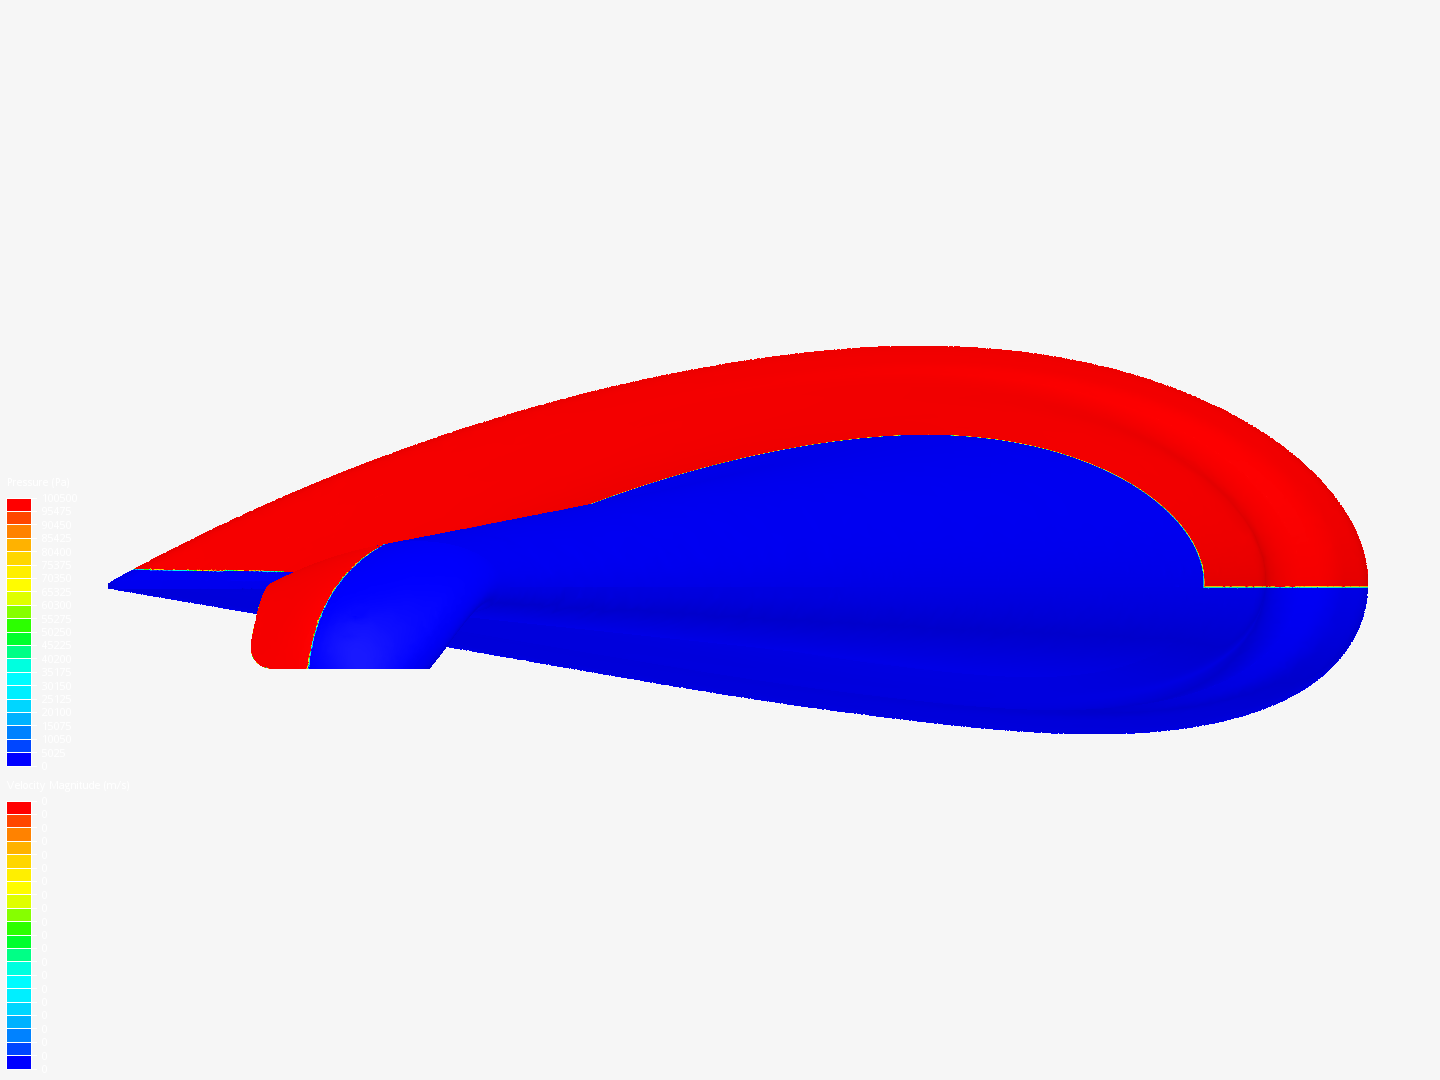 AirfoilCFD image